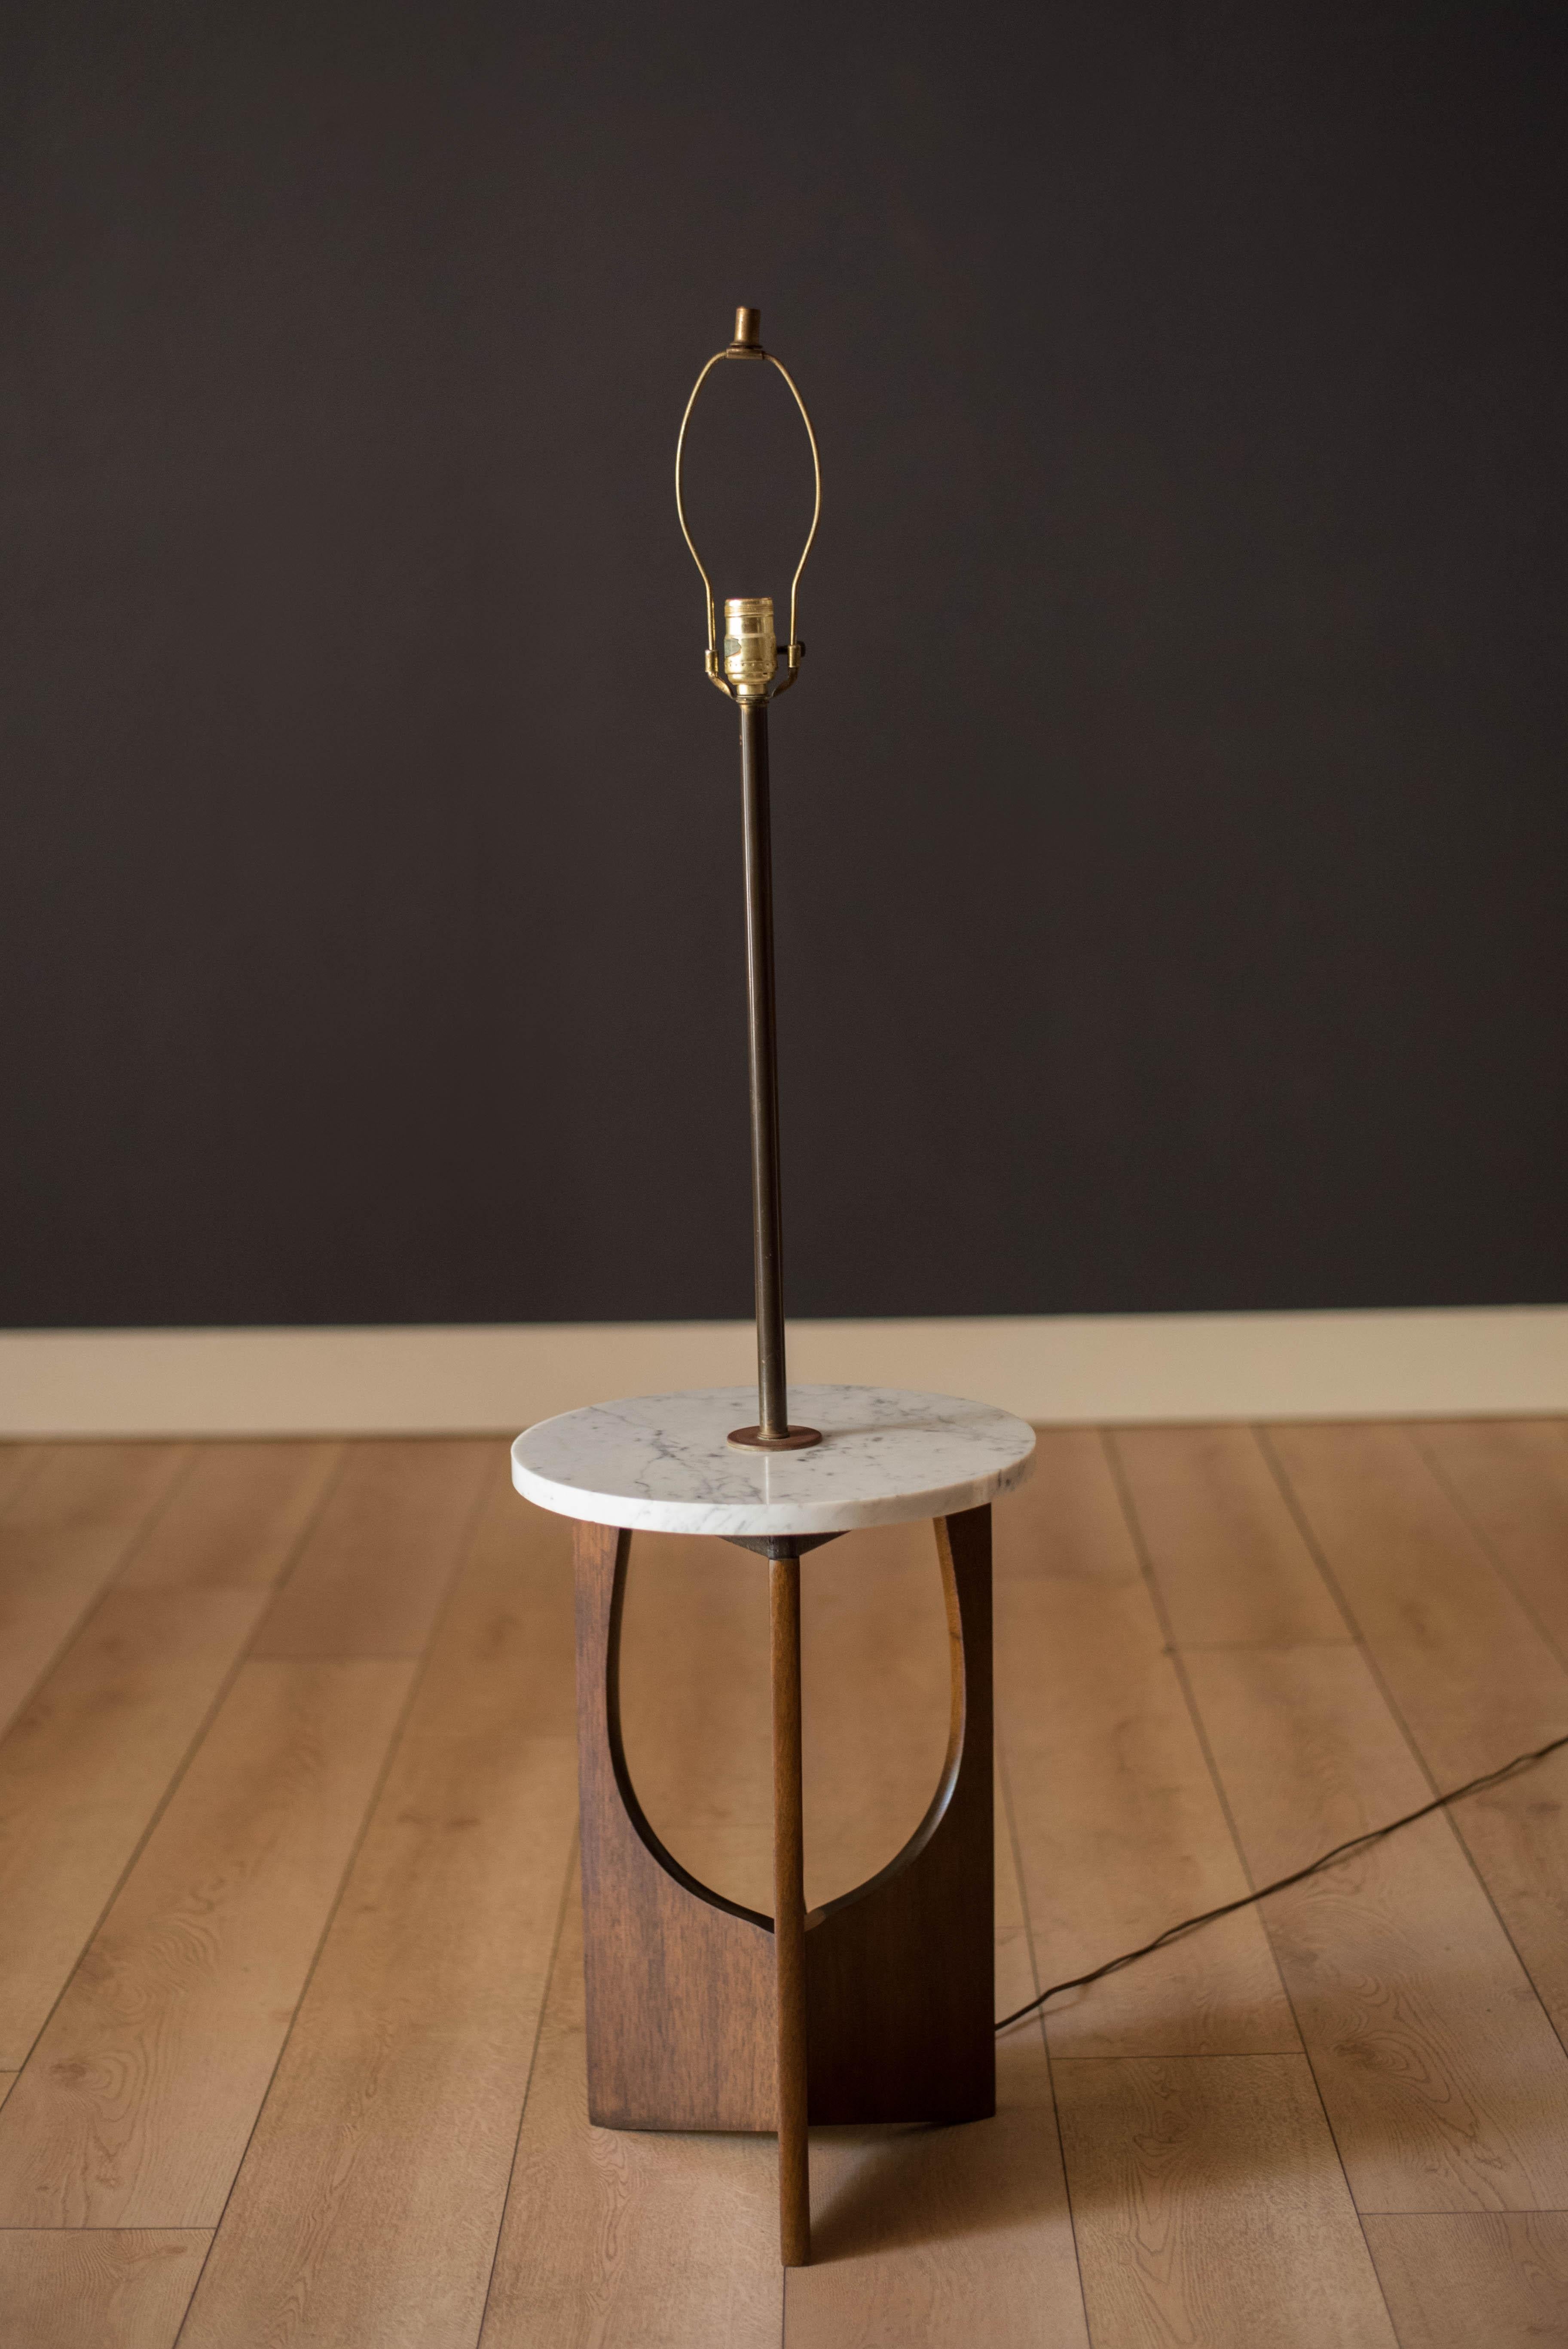 lamp with table attached